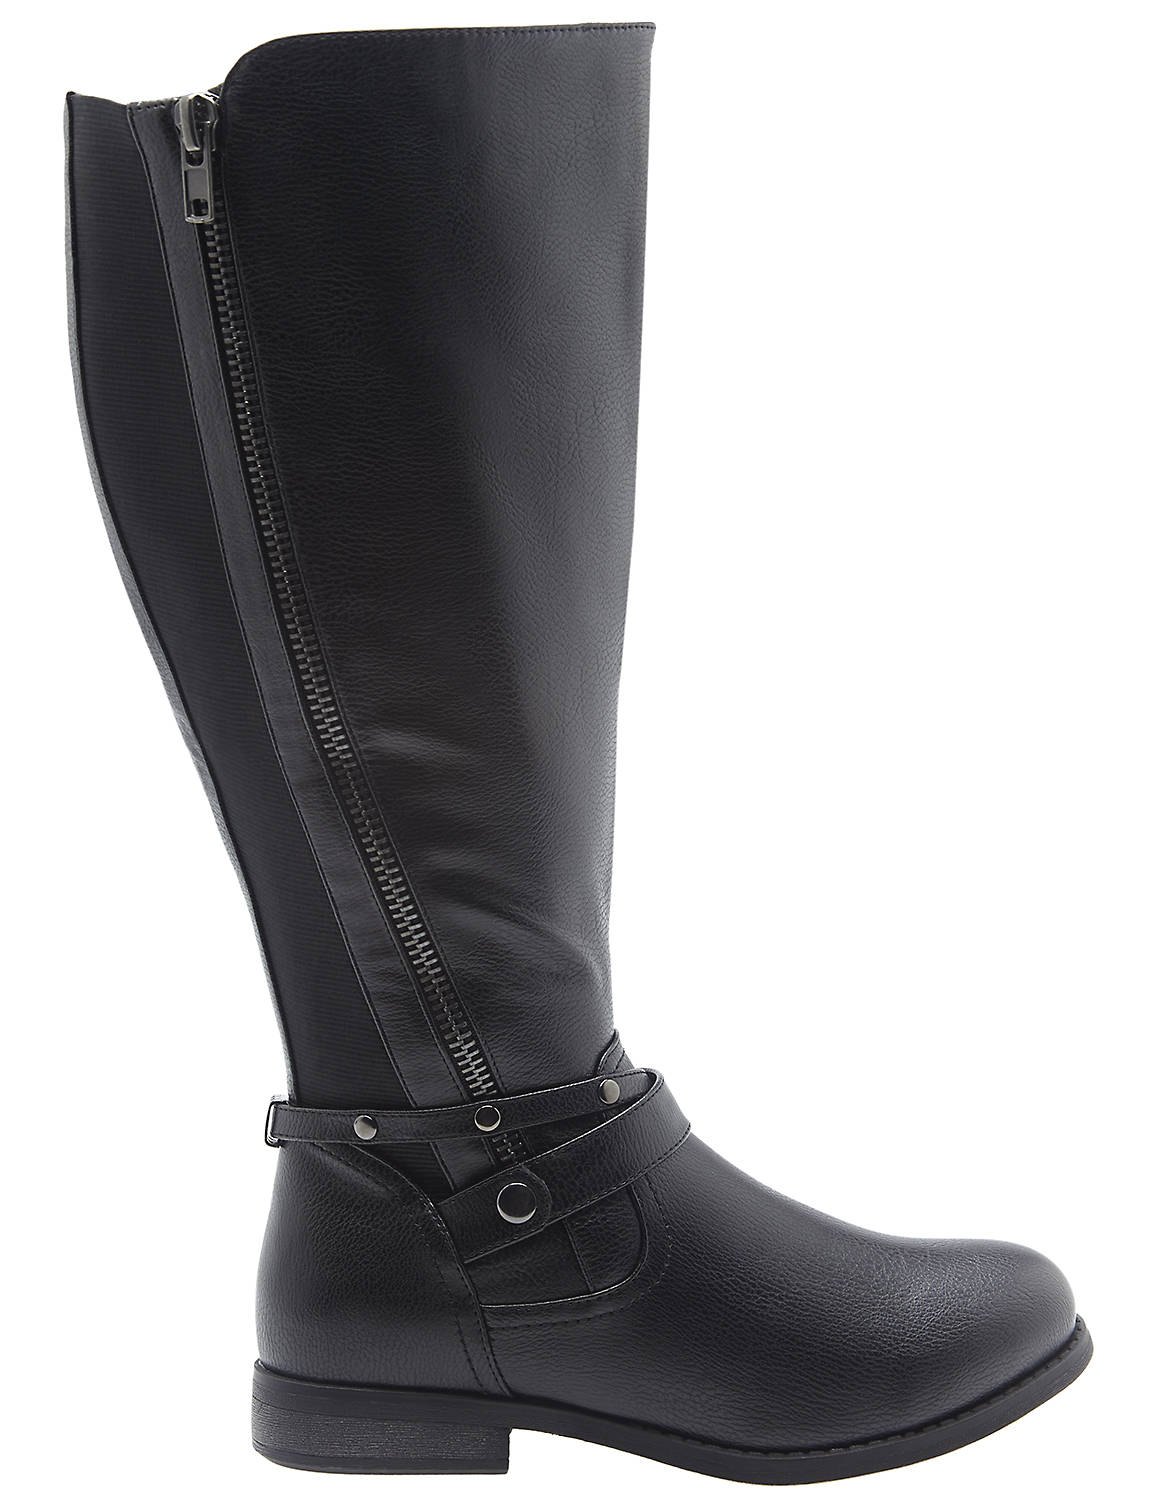 ZIPPER DETAIL RIDING BOOT Product Image 2